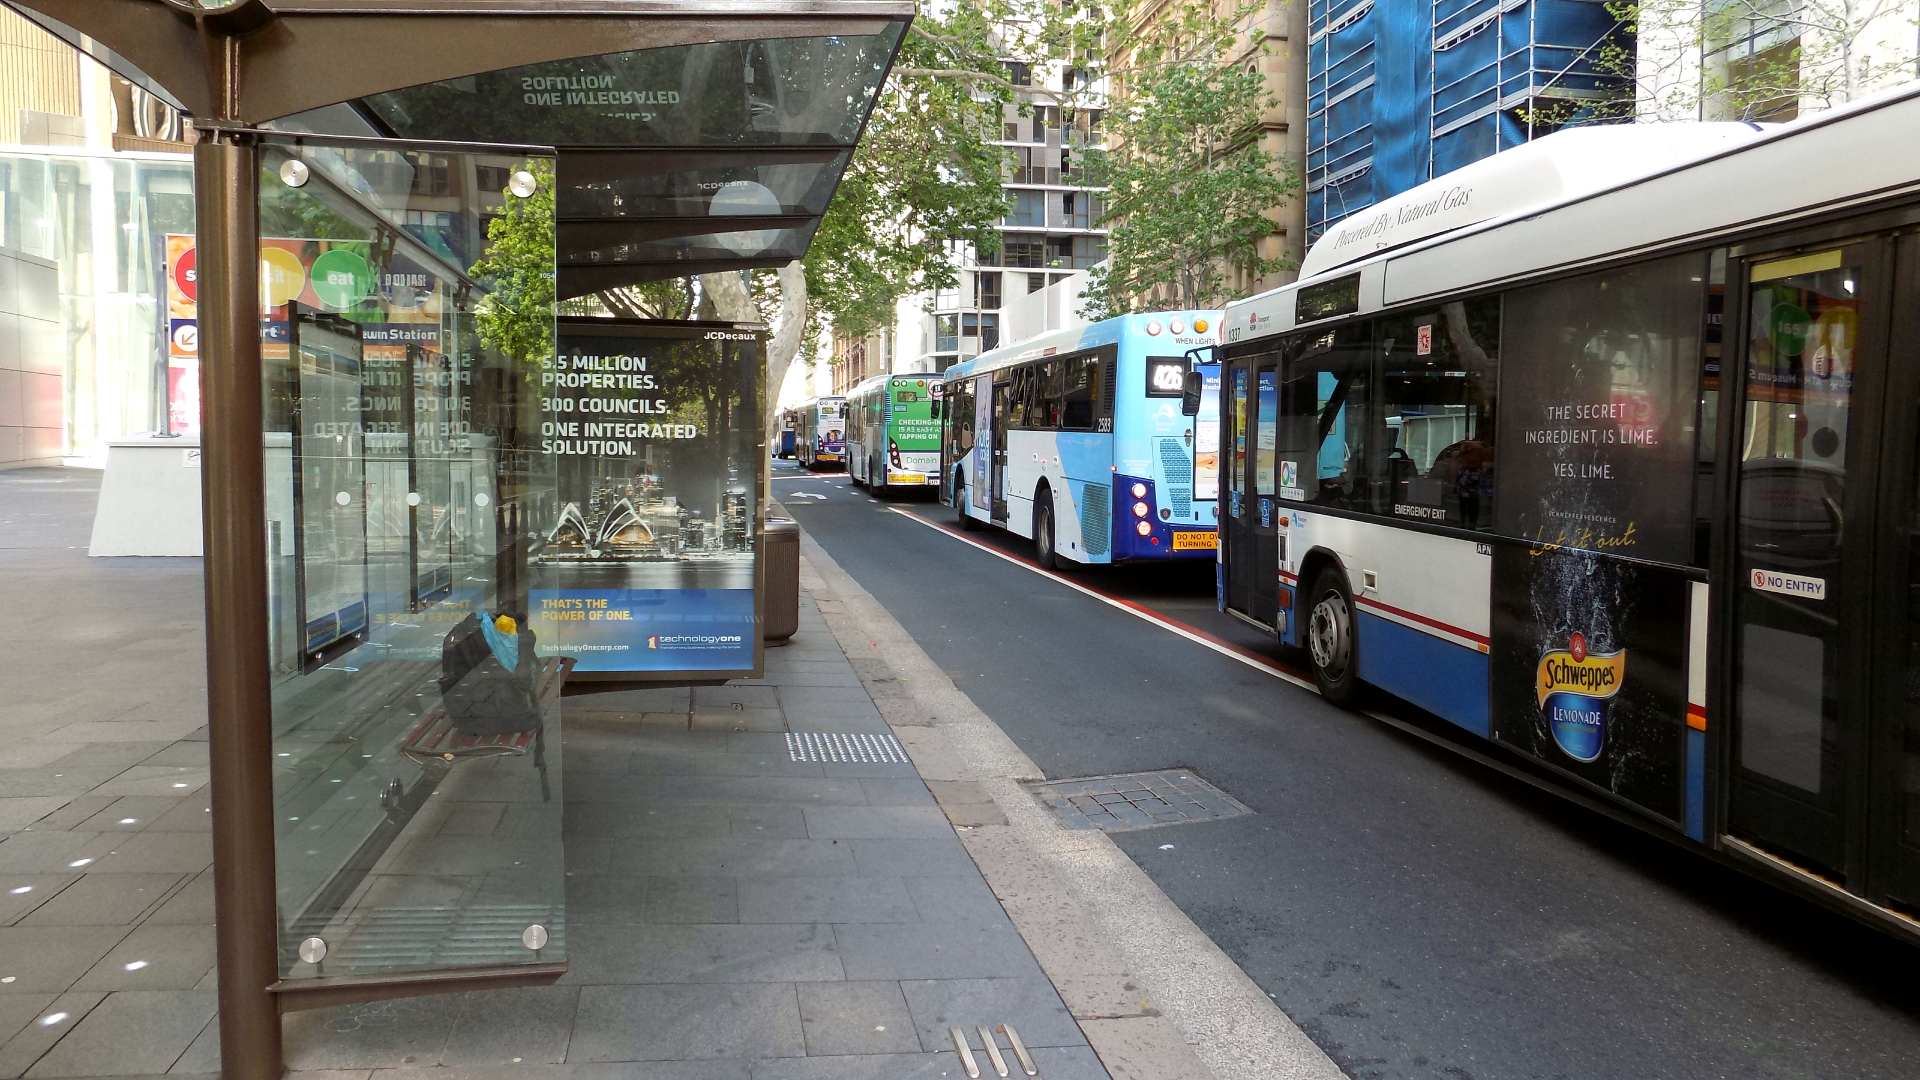 Only 12 Sydneysiders Are Allowed on a Bus Under New Social Distancing Guidelines